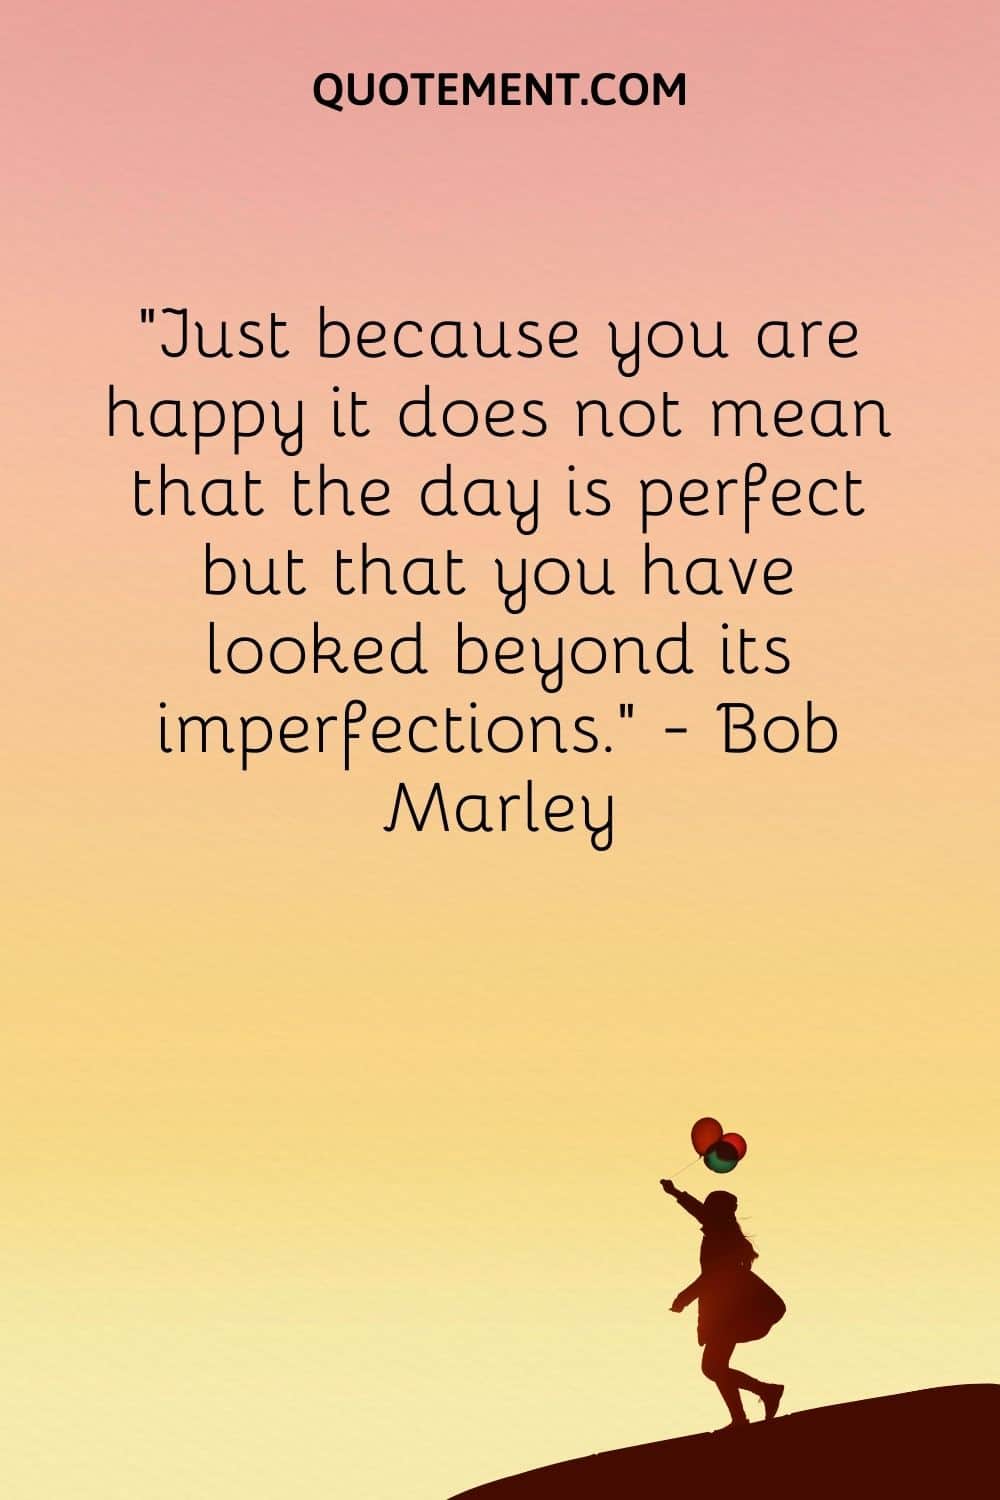 Just because you are happy it does not mean that the day is perfect but that you have looked beyond its imperfections